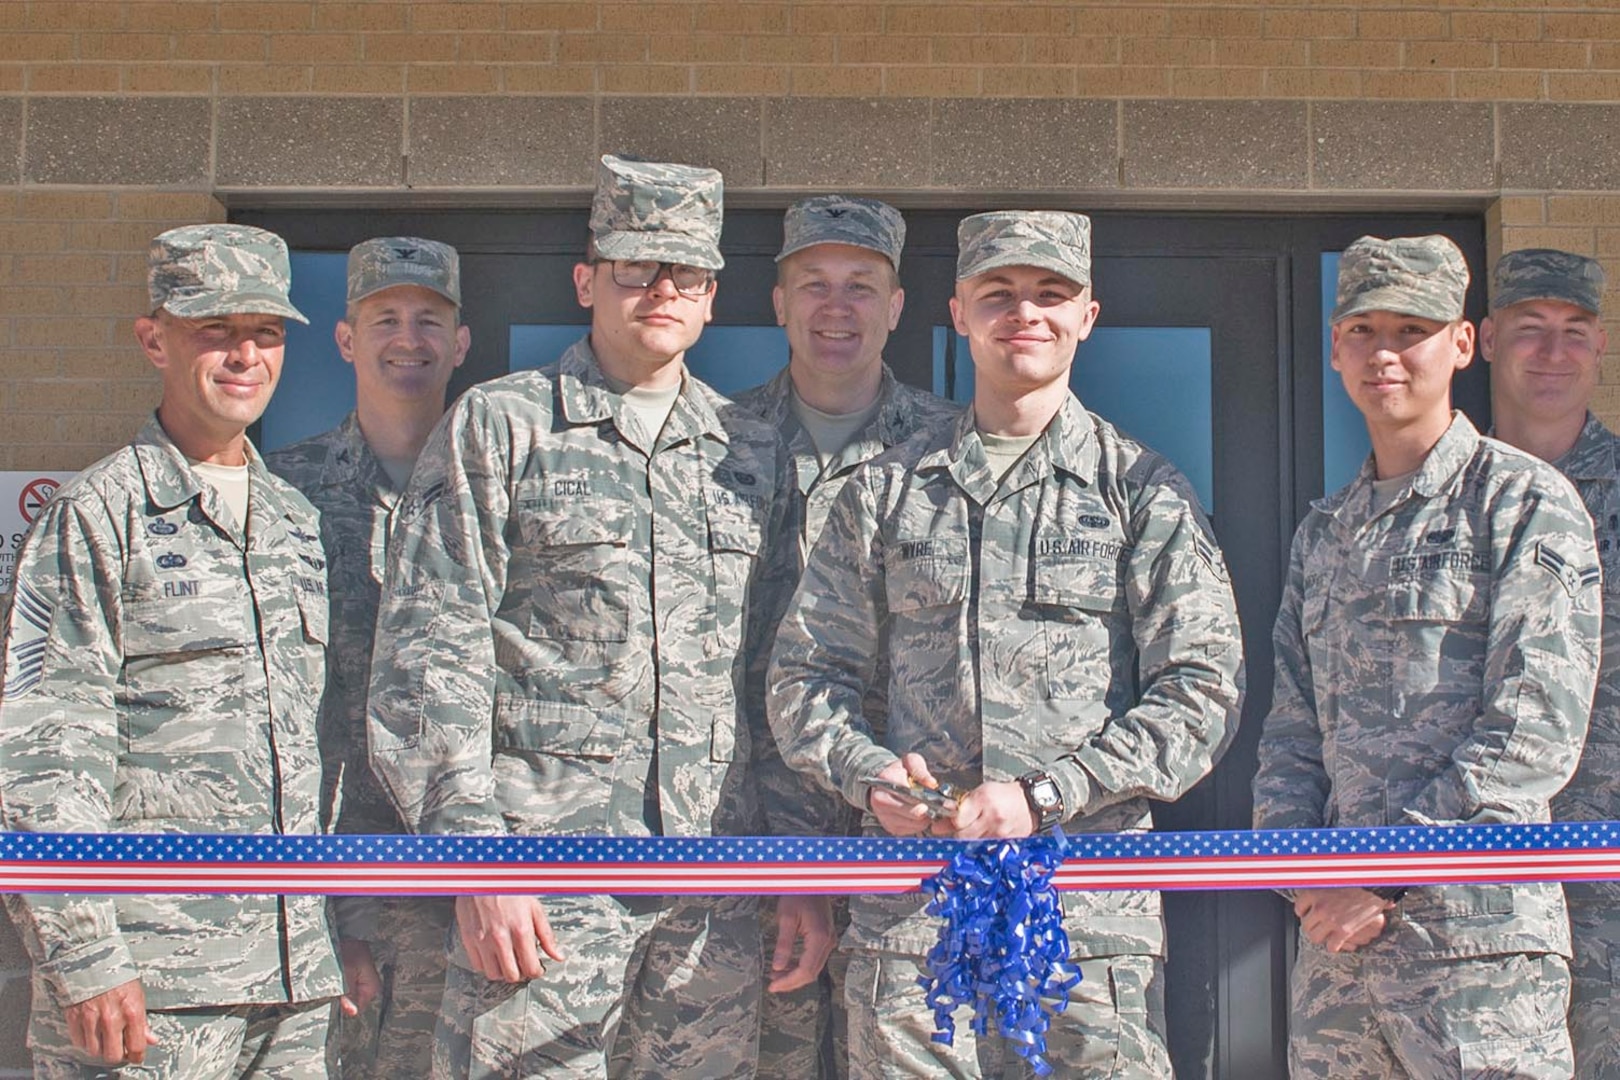 The 502d Civil Engineering Squadron conducted a Ribbon Cutting Ceremony for a 144 person dormitory at JBSA Lackland AFB on February 21, 2017. The $18 million dollar facility opened after a 30 month construction in September 2016 when active duty airman of the 24th AF, 25th AF, and the 502 Air Base Wing began moving in. 